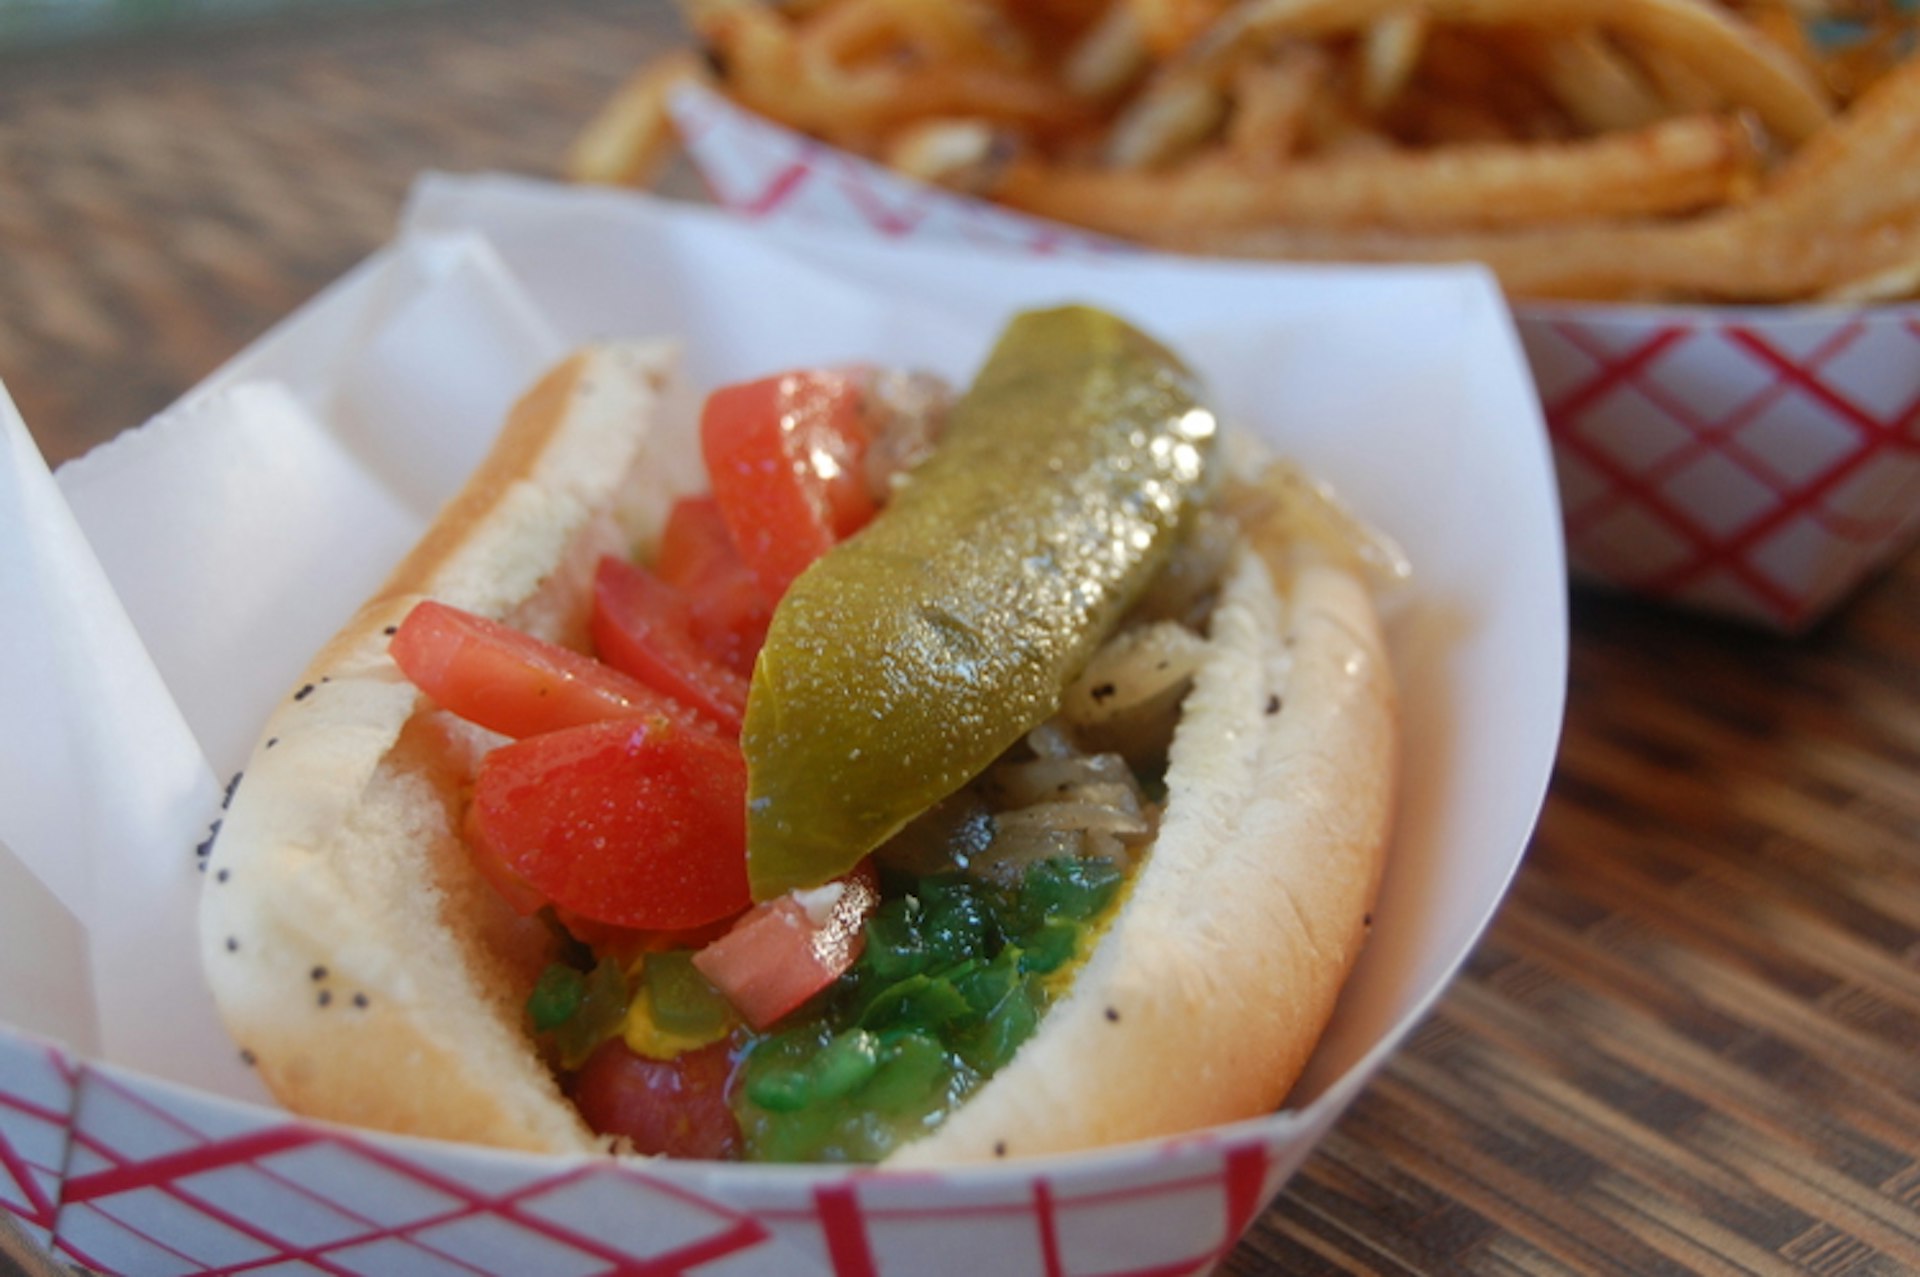 Chicago-style hot dog. Image by stu_spivack / CC BY-SA 2.0